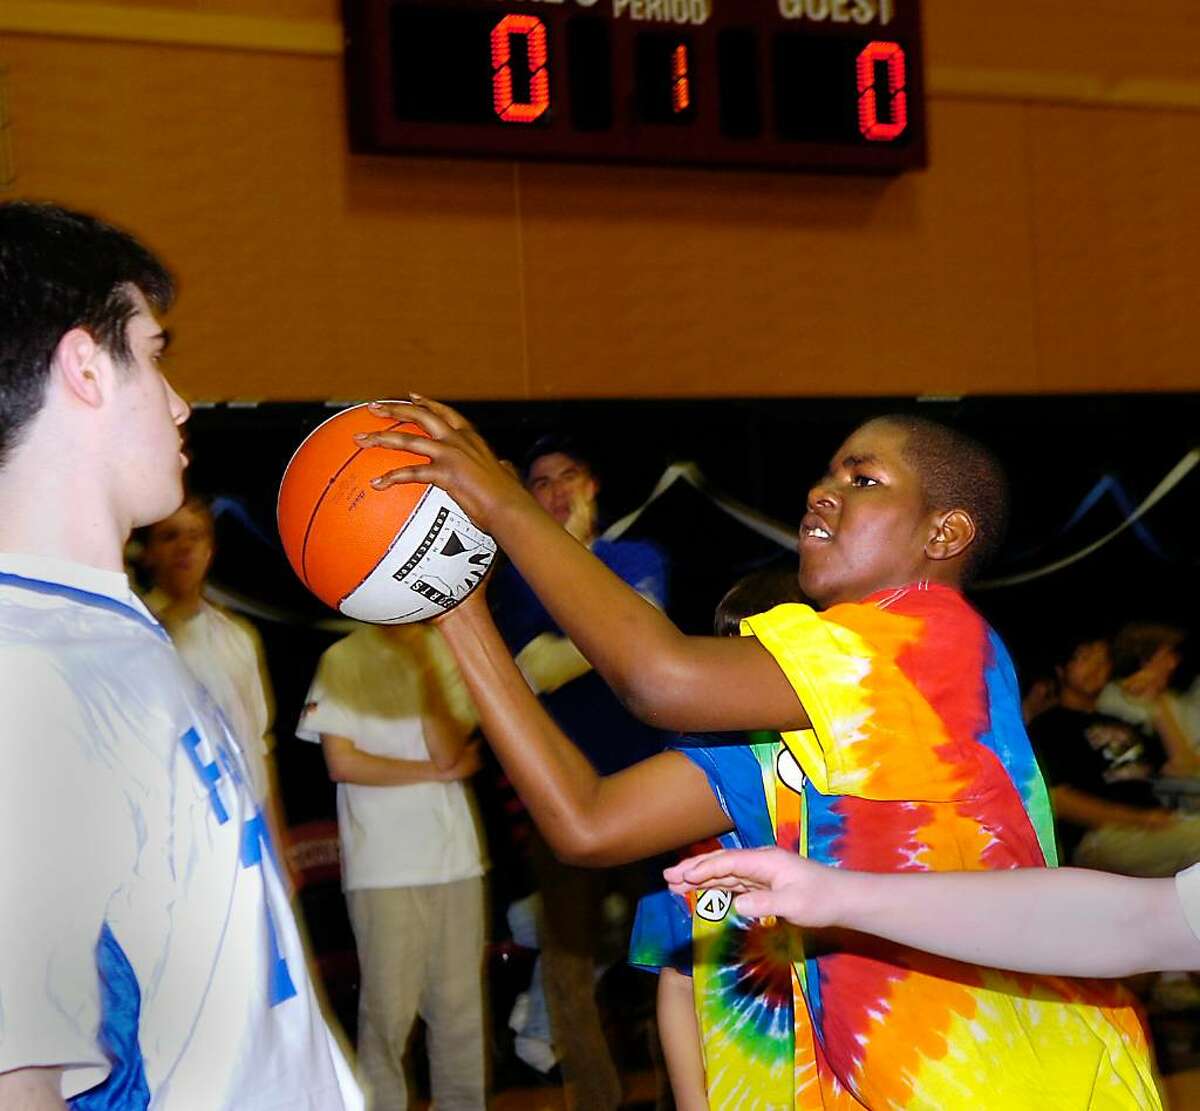 Stamford Black Knight, Elijah Sinclair, in action during the Unified Sports Basketball Tournament at St. Luke's School in New Canaan.